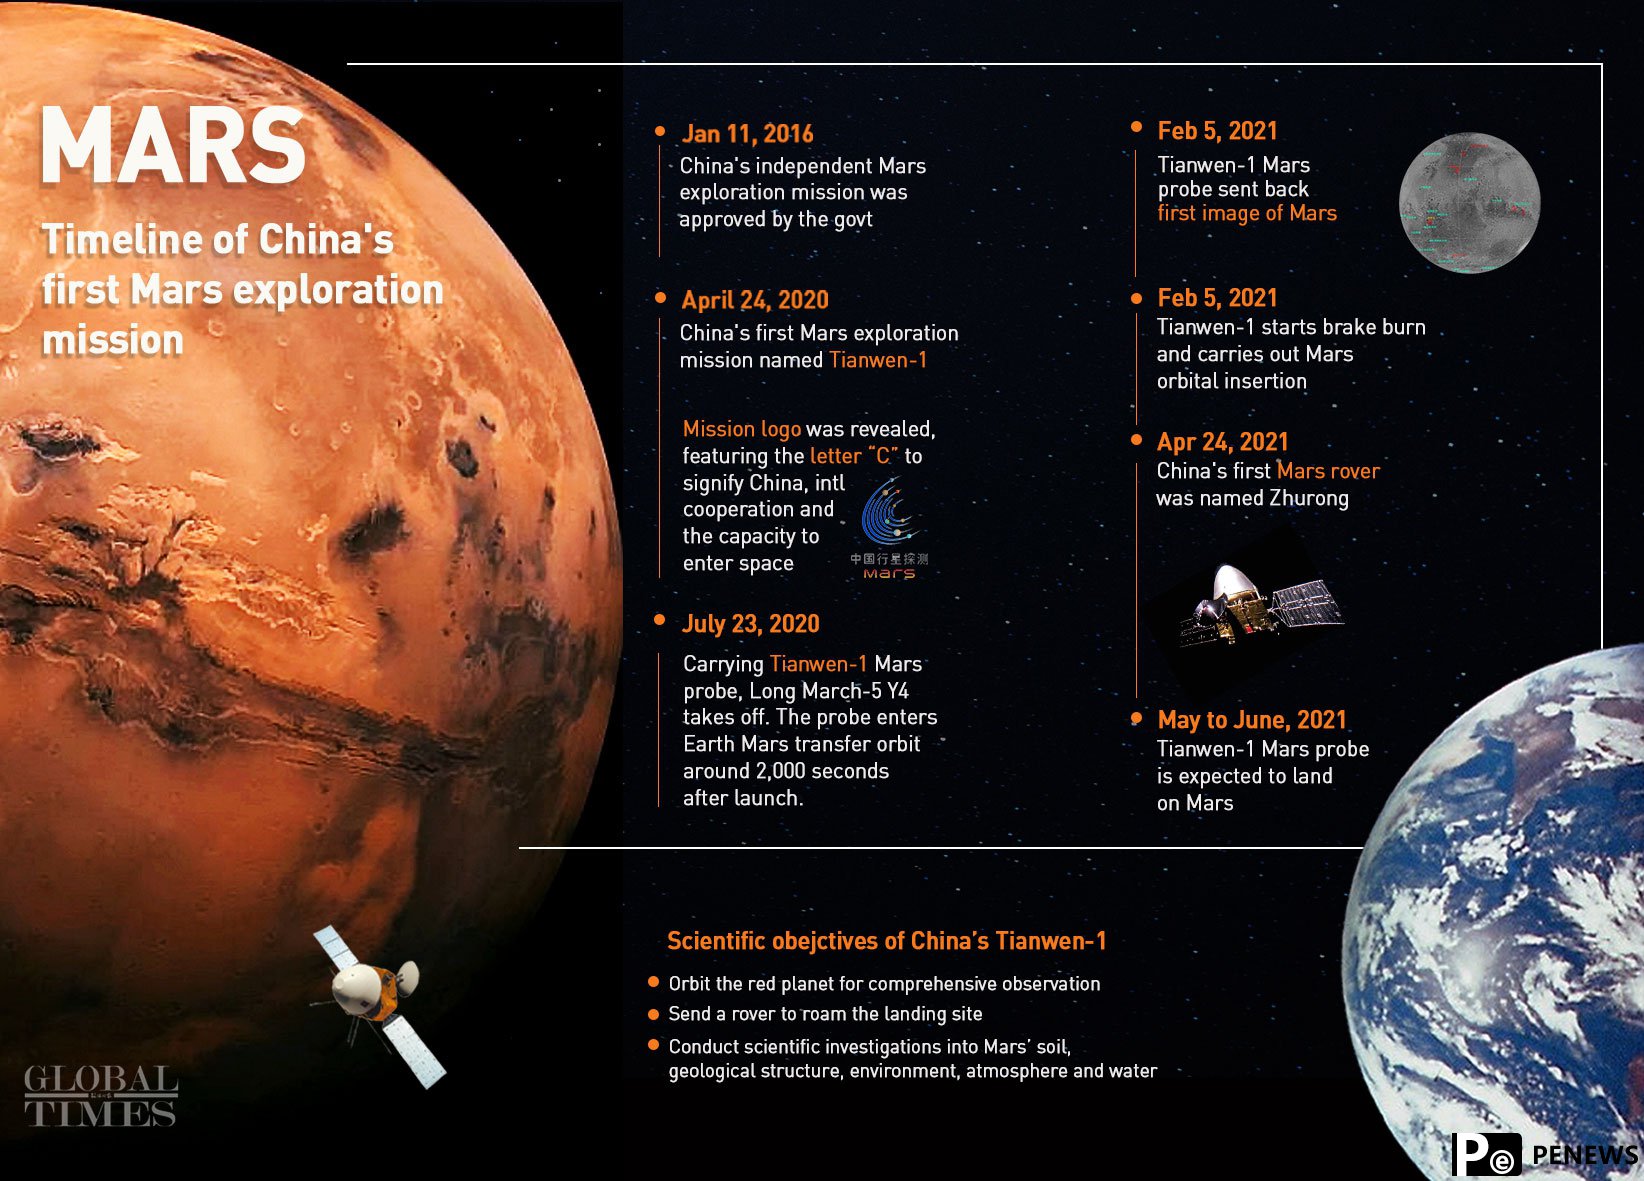 Tianwen-1 ready for Mars touchdown amid high confidence as landing window opens